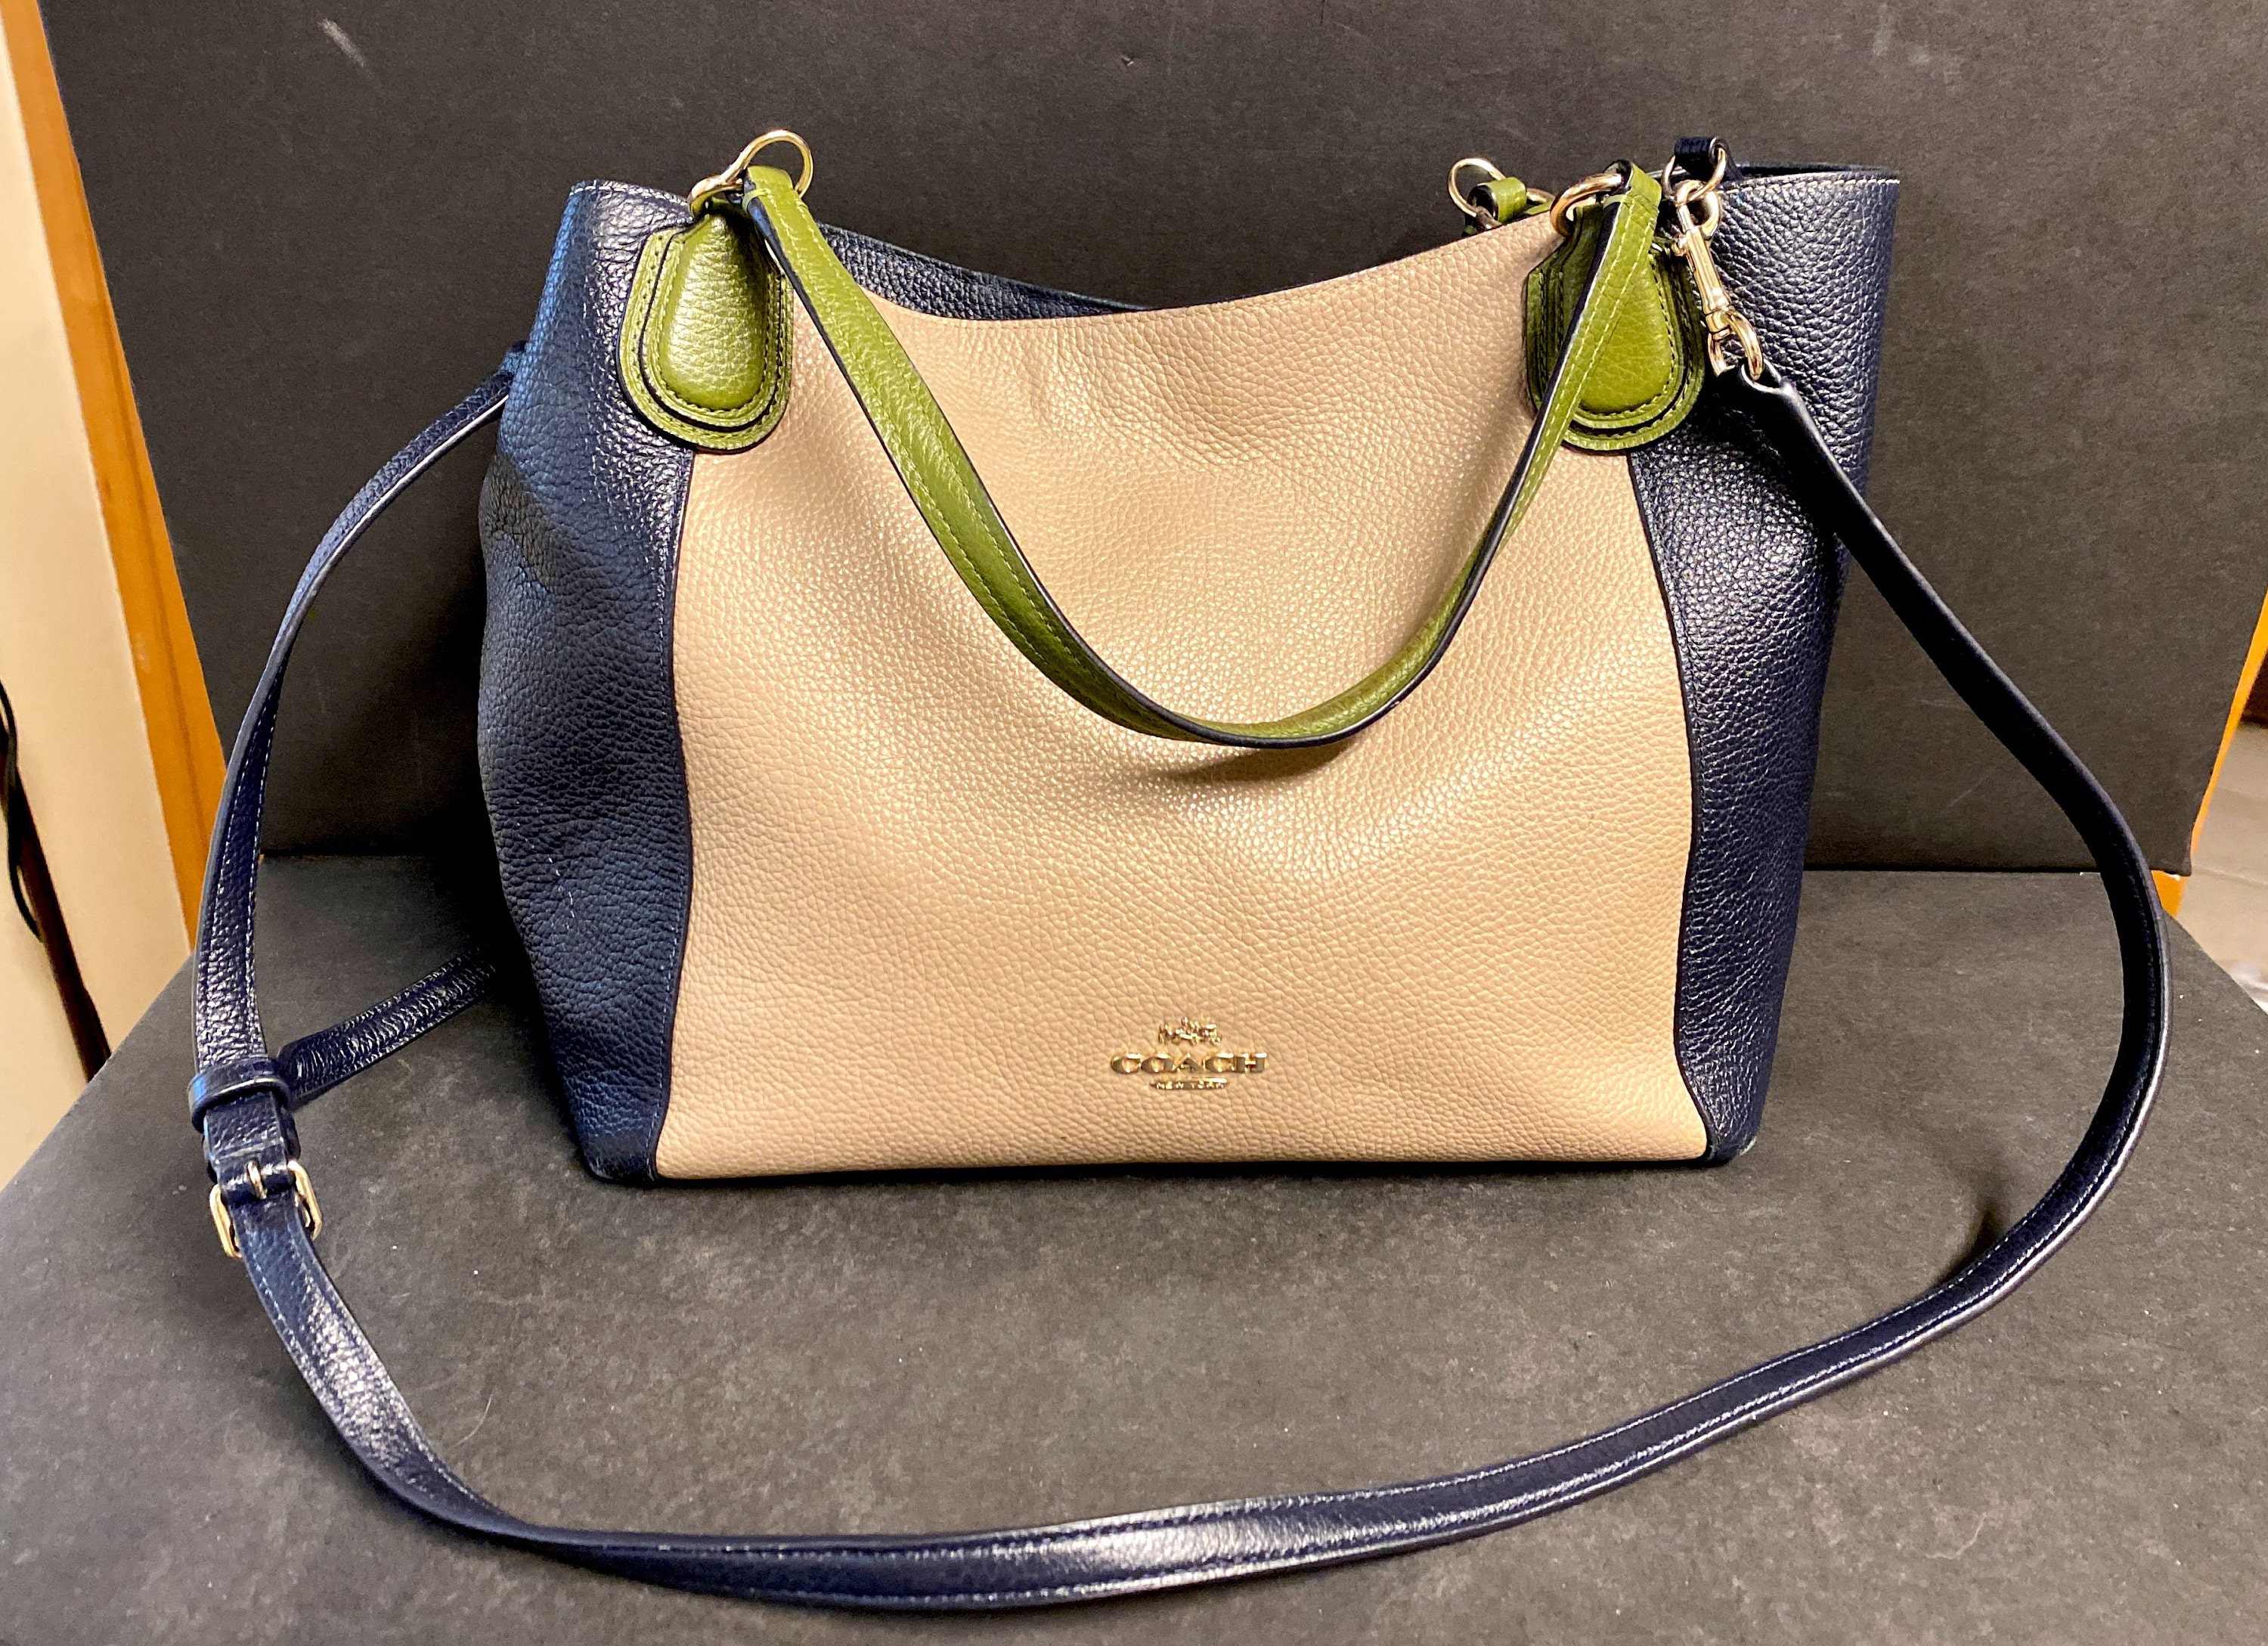 Buy Coach Hadley Hobo Colorblock Leather Bag for Womens